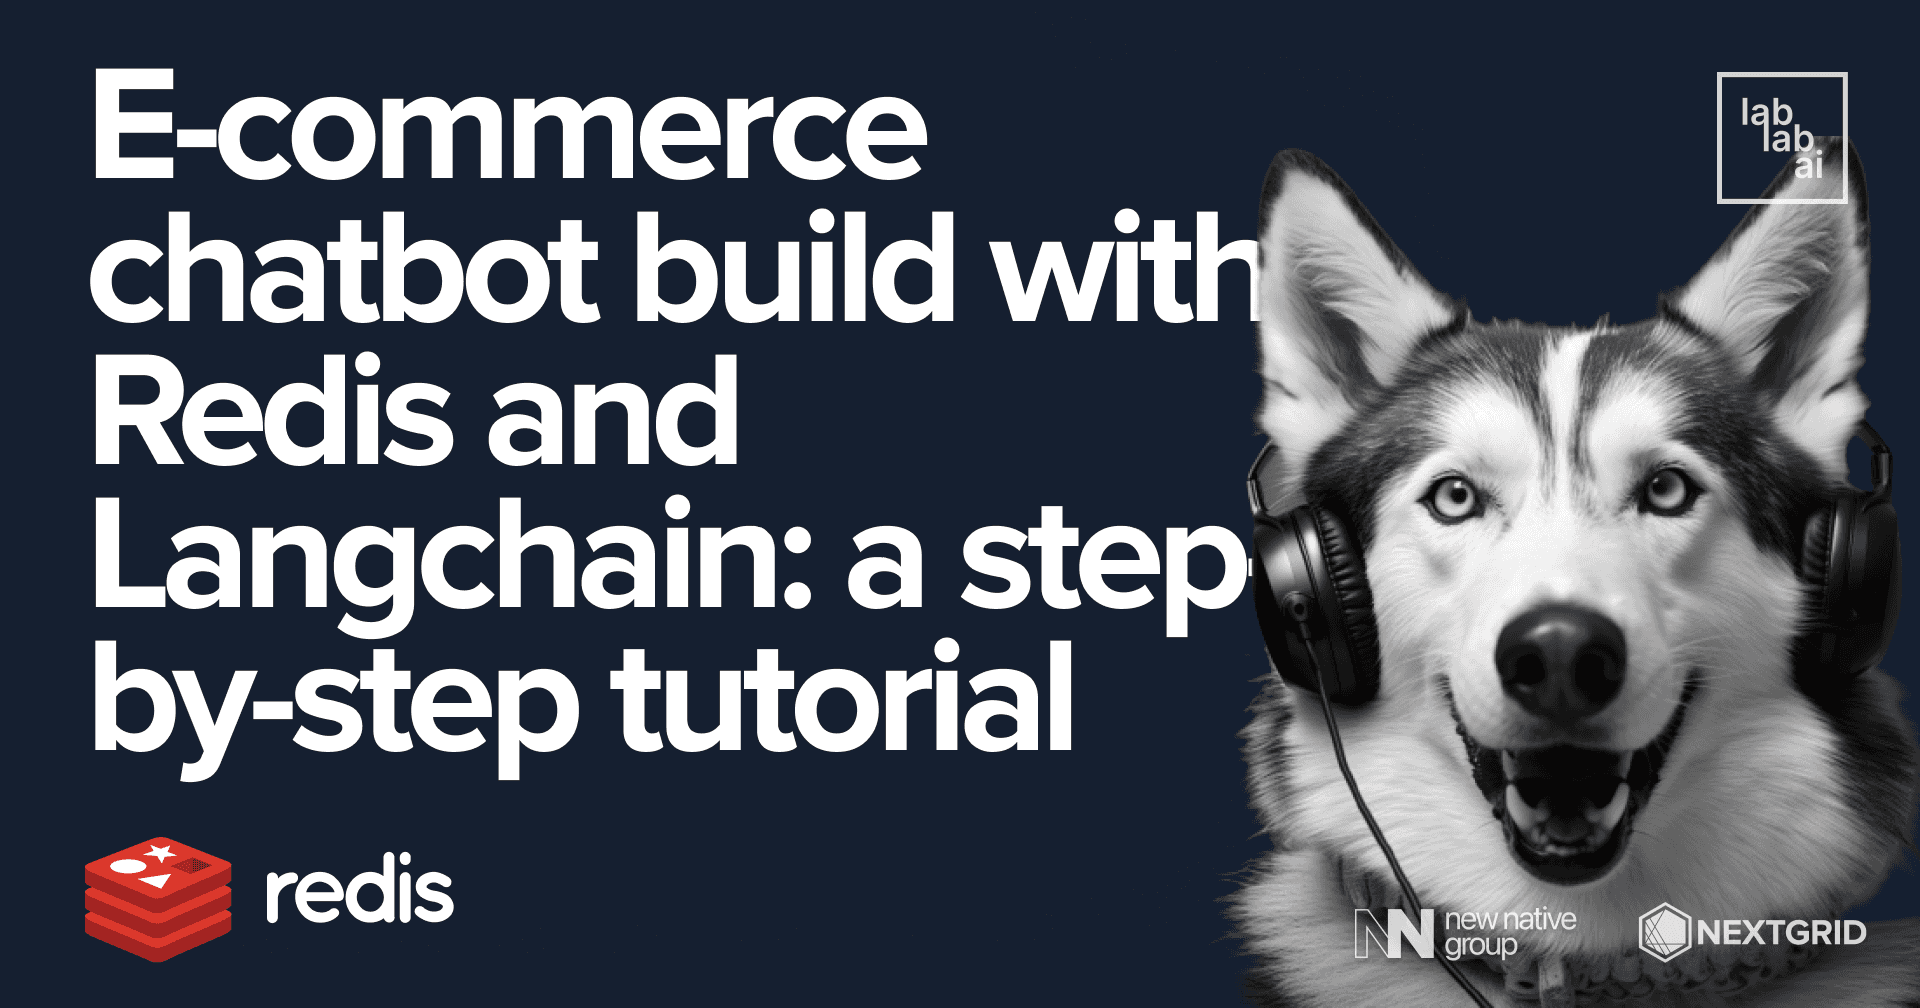 E-commerce chatbot build with Redis and Langchain: a step-by-step tutorial